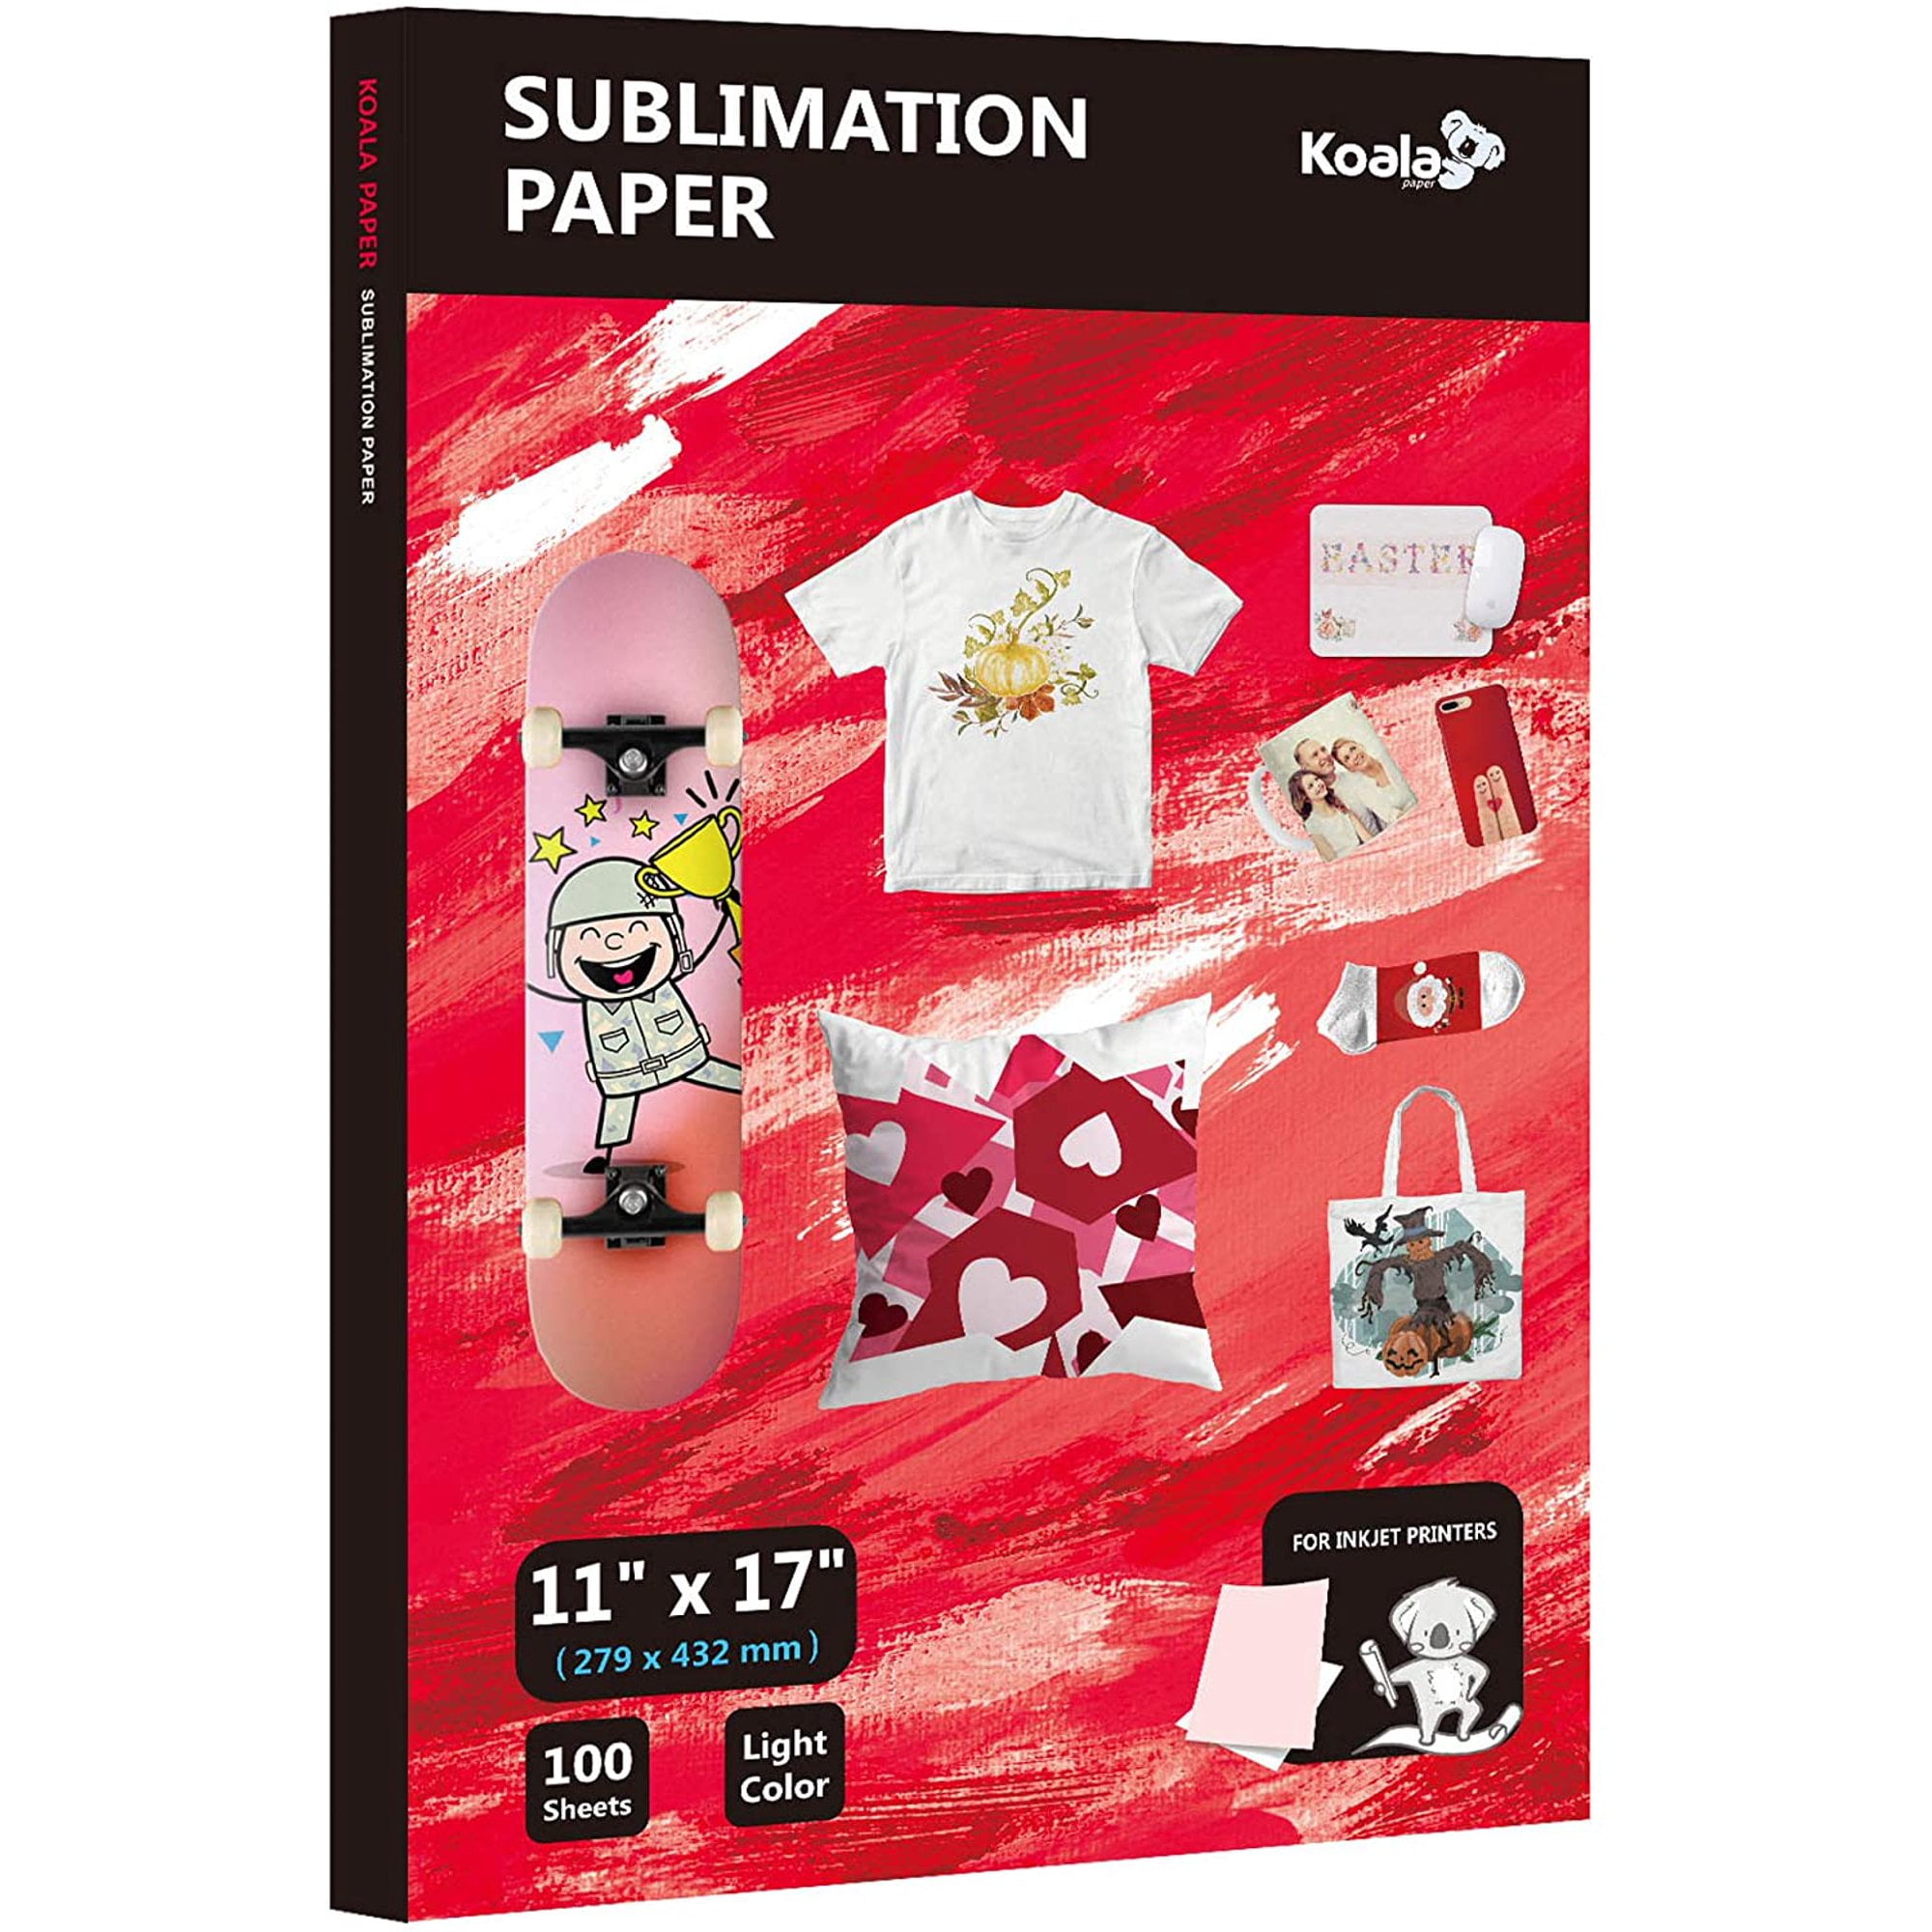 A-sub 100 Sheets Sublimation Paper 8.5x14 Inches + 4X 120ml Dye Sublimation Ink Compatible with Epson Inkjet Printer, Size: 8.5 x 14, White